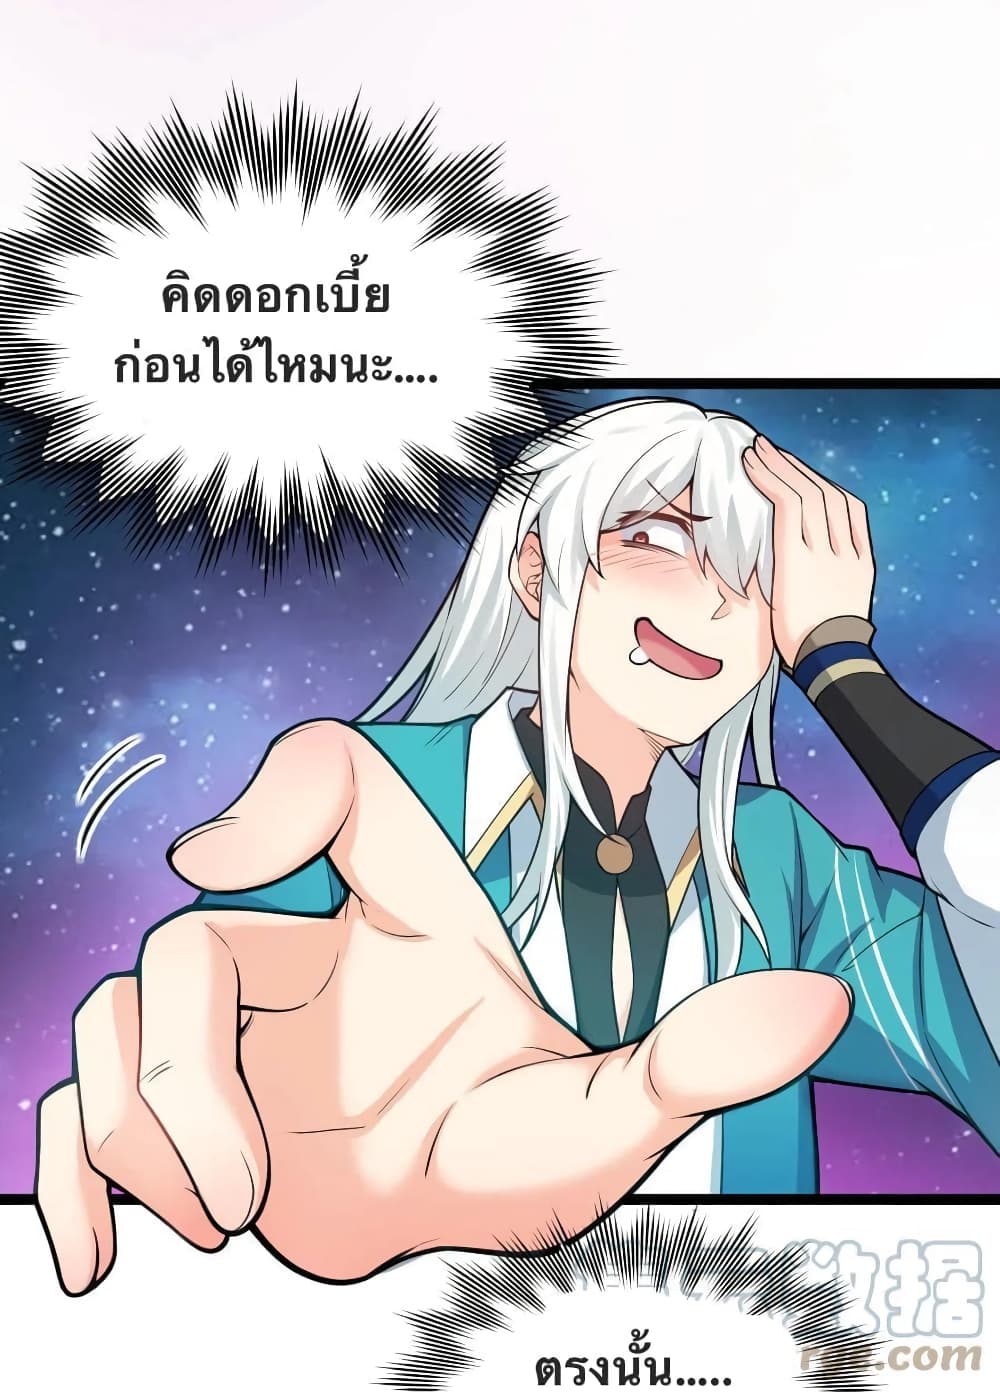 Godsian Masian from Another World ตอนที่ 96 (11)